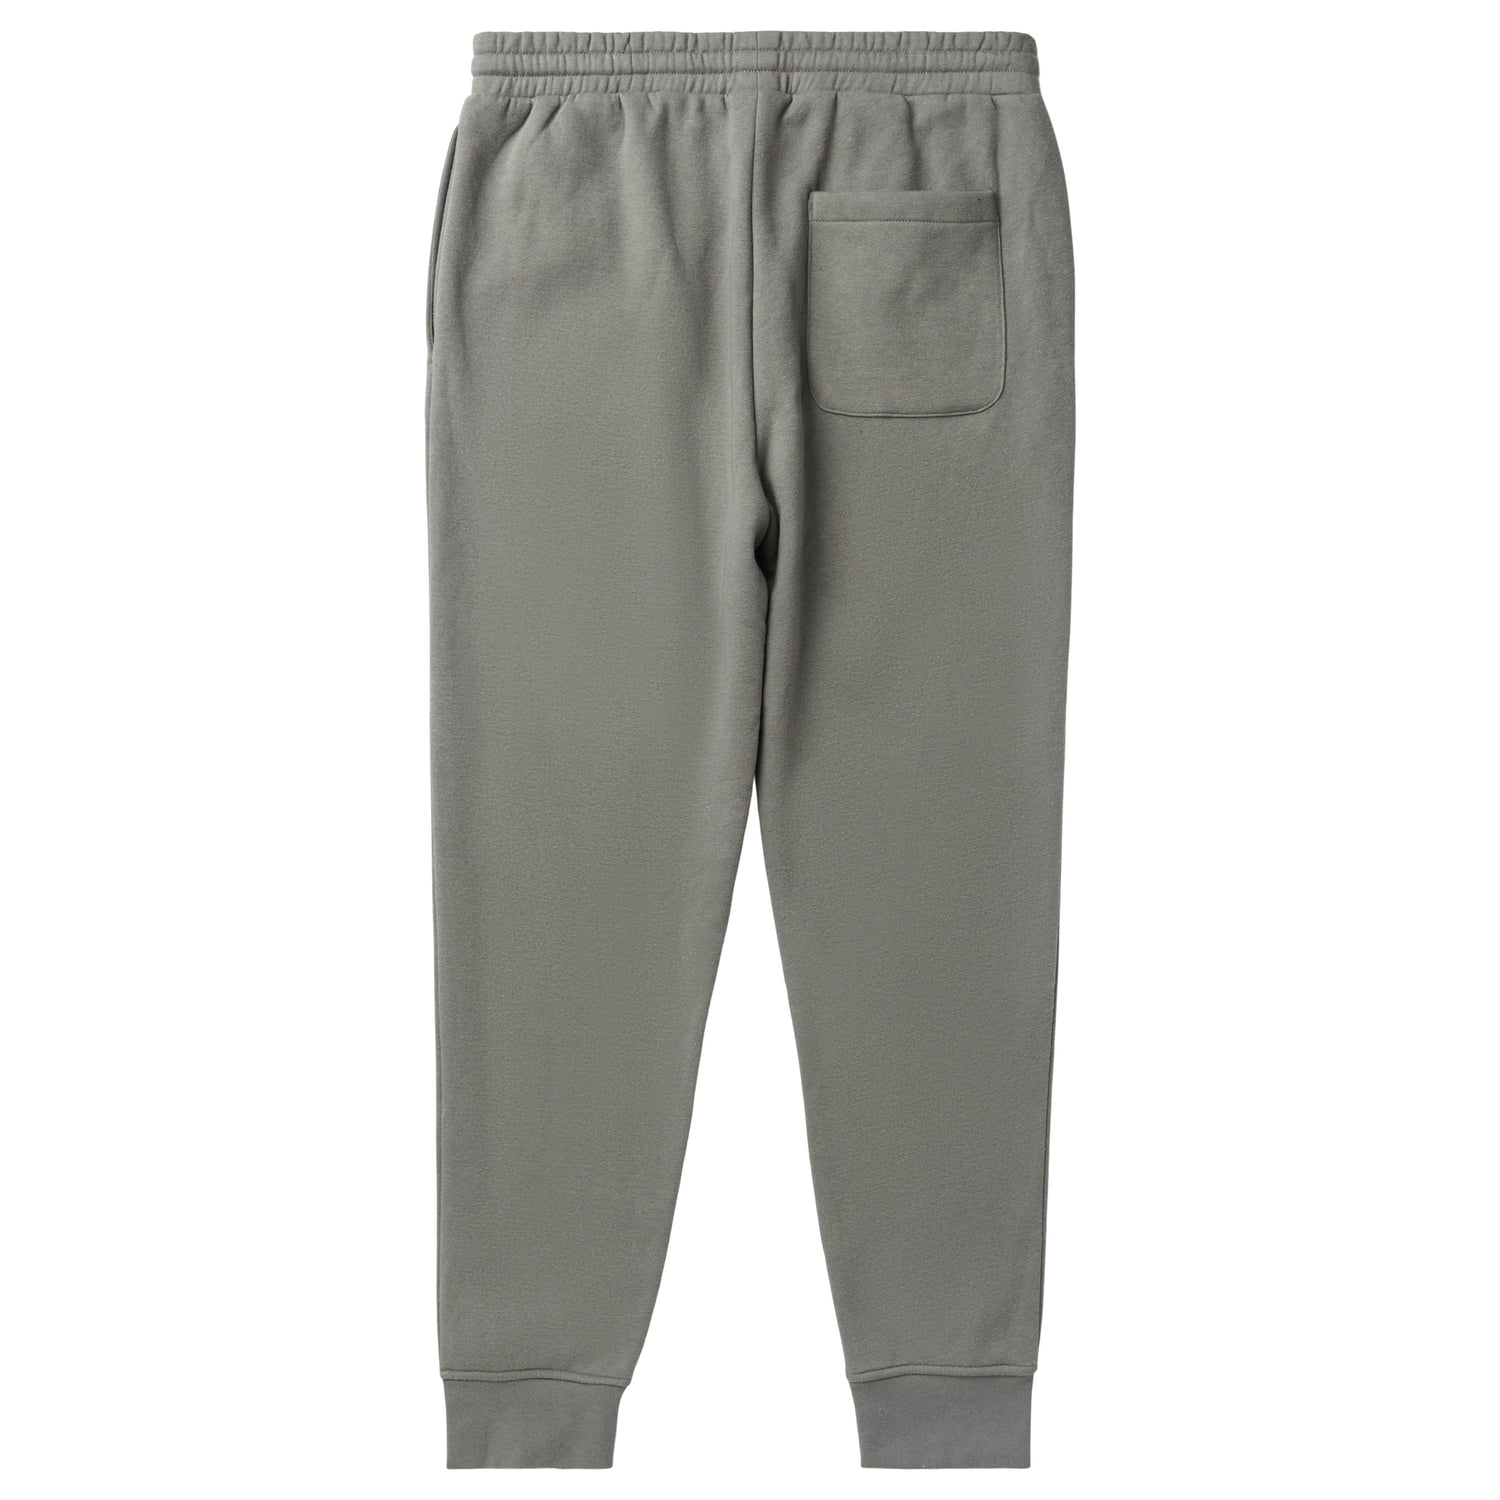 WITH US TREES JOGGER SWEATPANTS - CHARCOAL